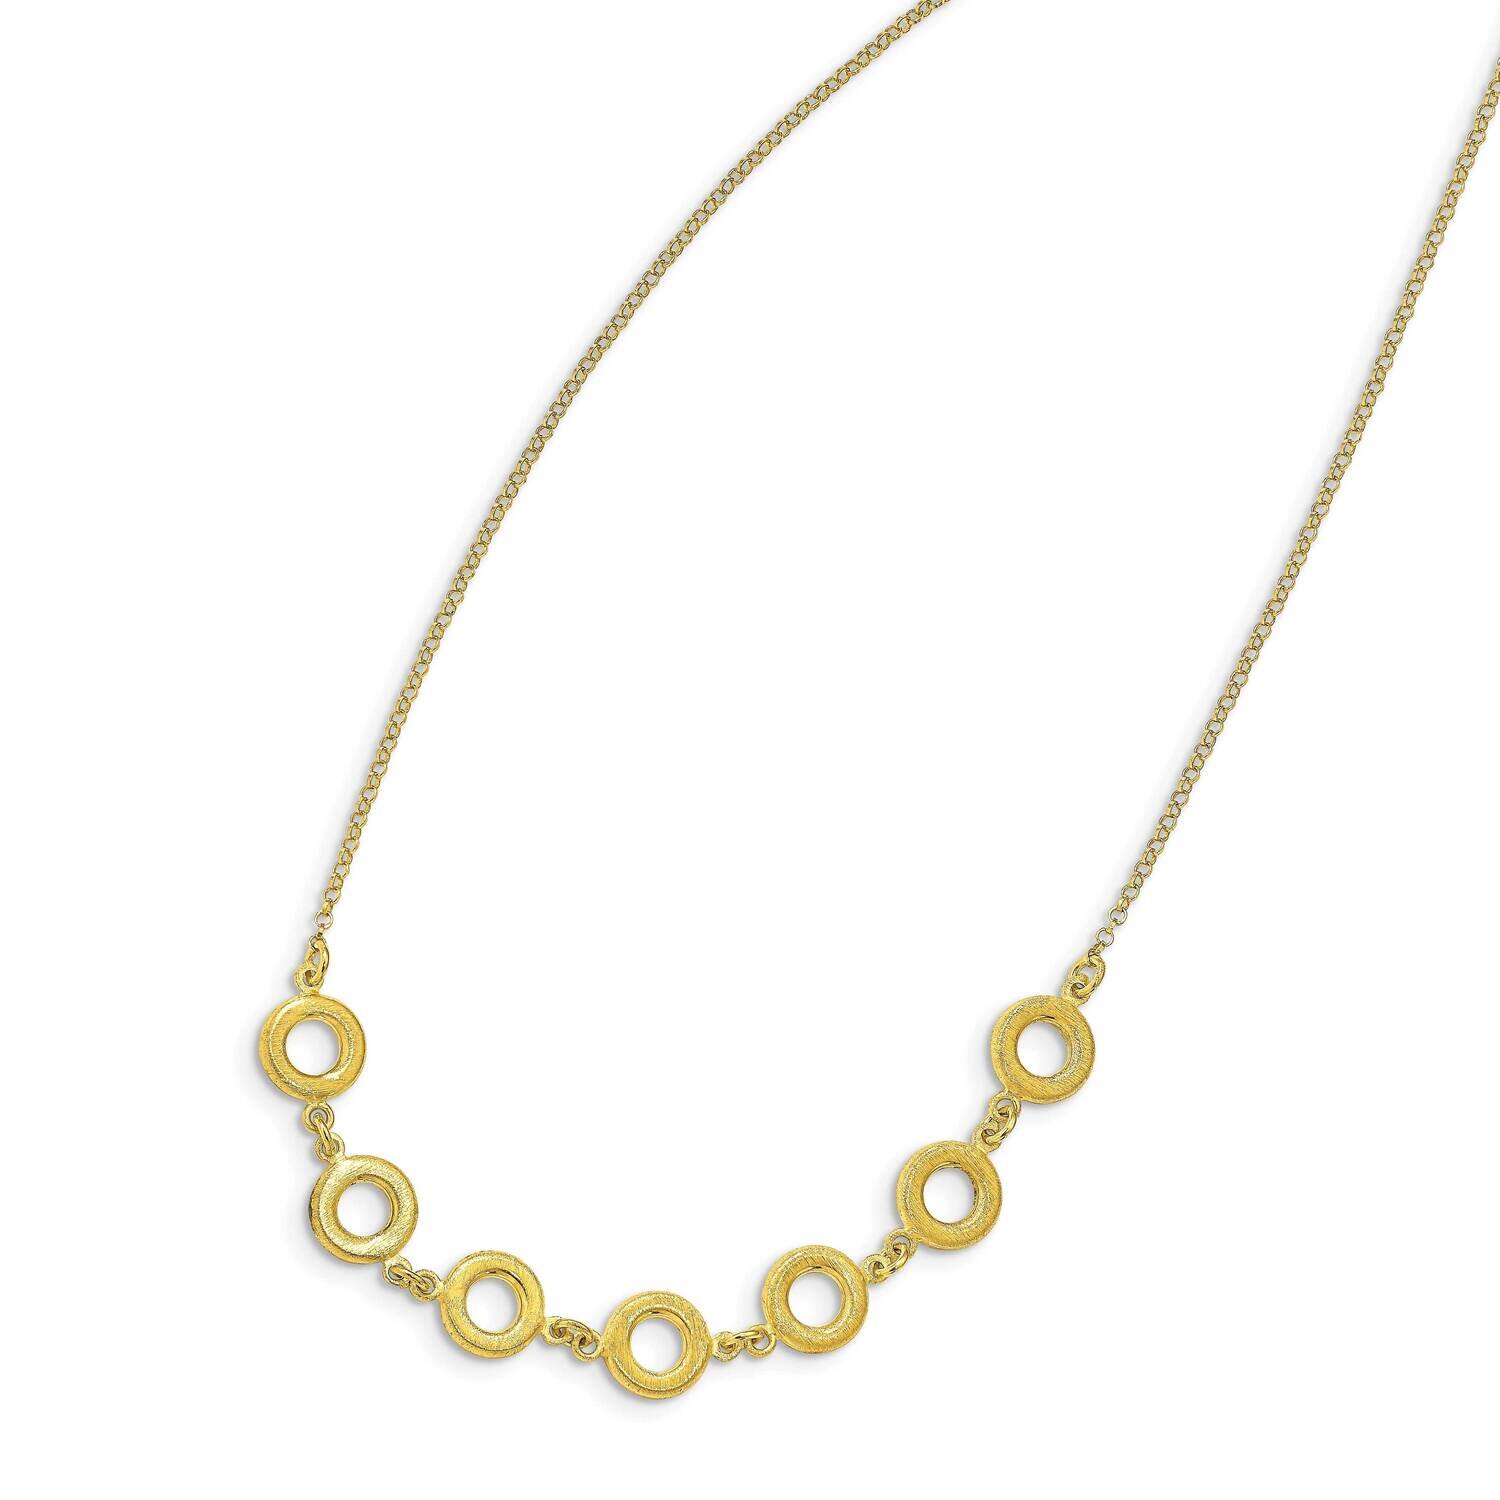 Textured with 1.5 Inch Extender Necklace Sterling Silver Gold-tone HB-QLF1150-17